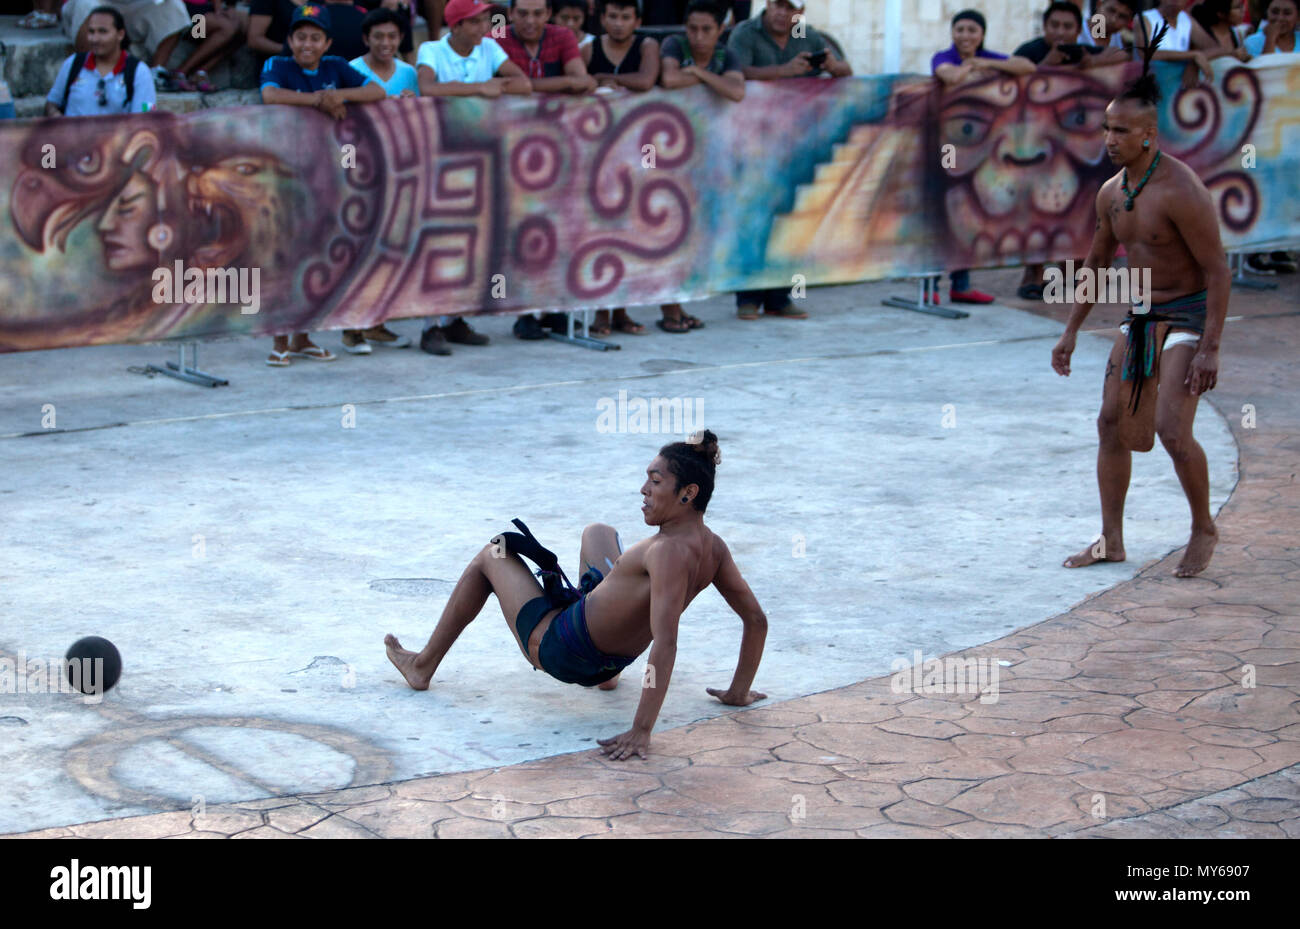 Players perfom at a Mayan Ball Game in Chichen Itza, Yucatan, Mexico Stock Photo